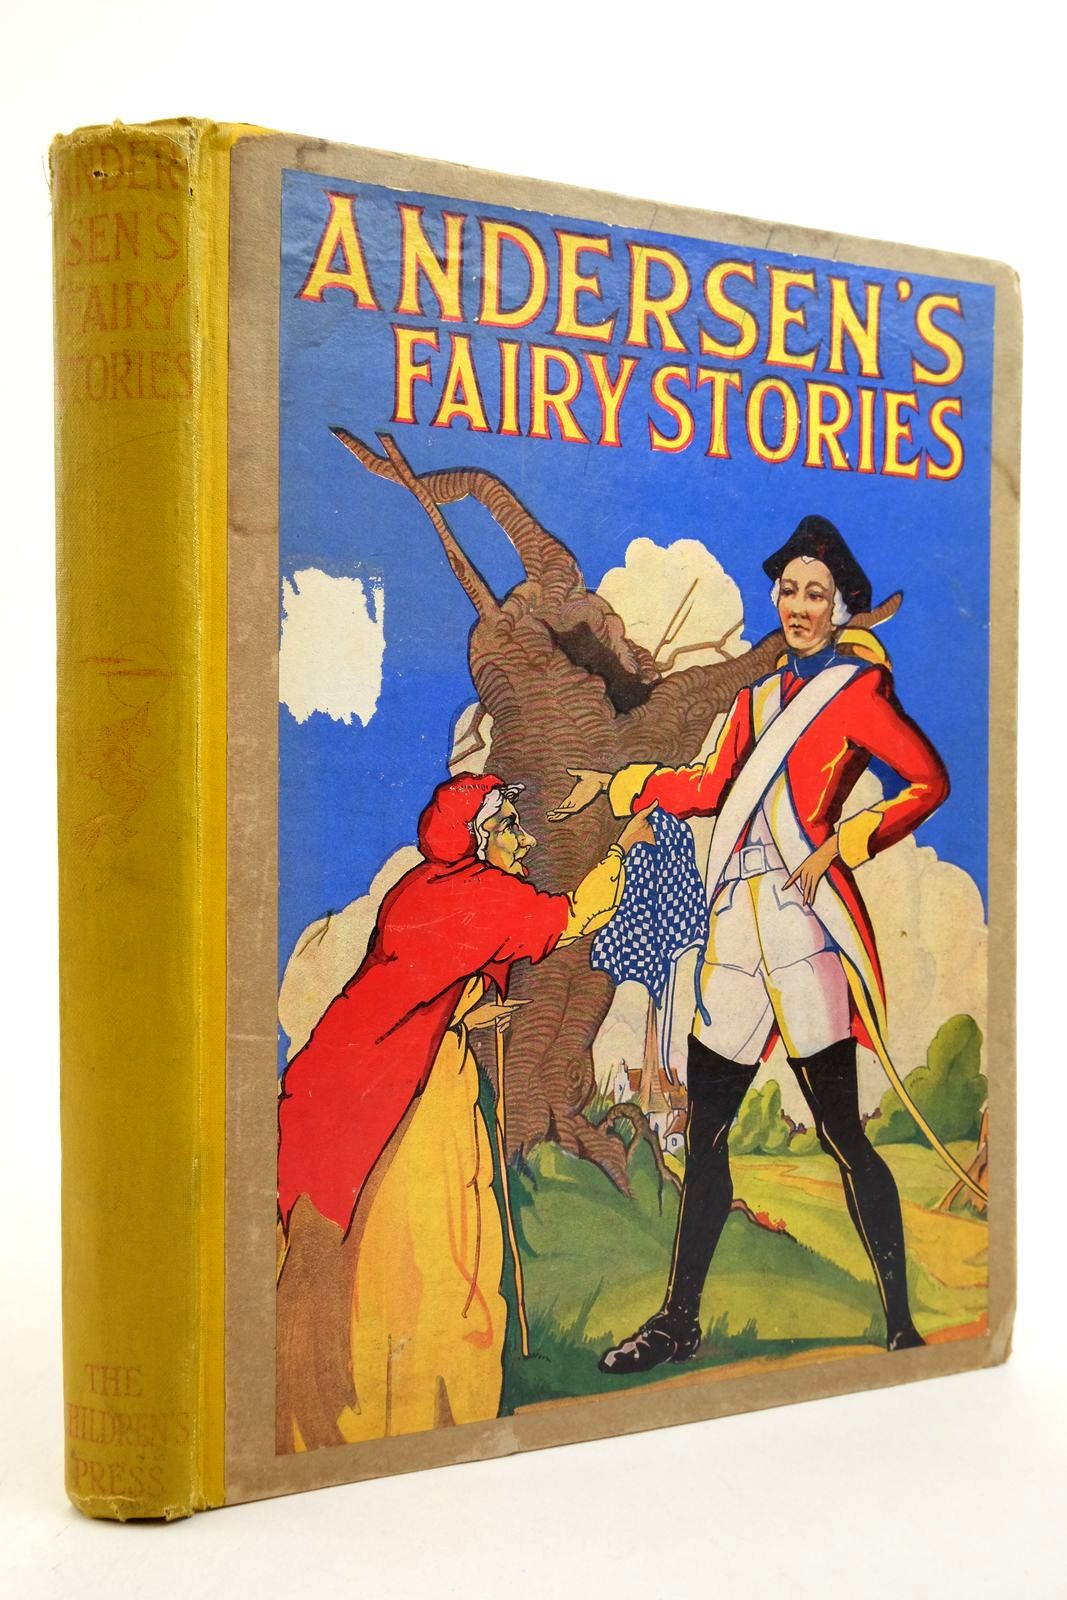 Photo of ANDERSEN'S FAIRY STORIES written by Andersen, Hans Christian illustrated by Anderson, Anne published by The Children's Press (STOCK CODE: 2140235)  for sale by Stella & Rose's Books